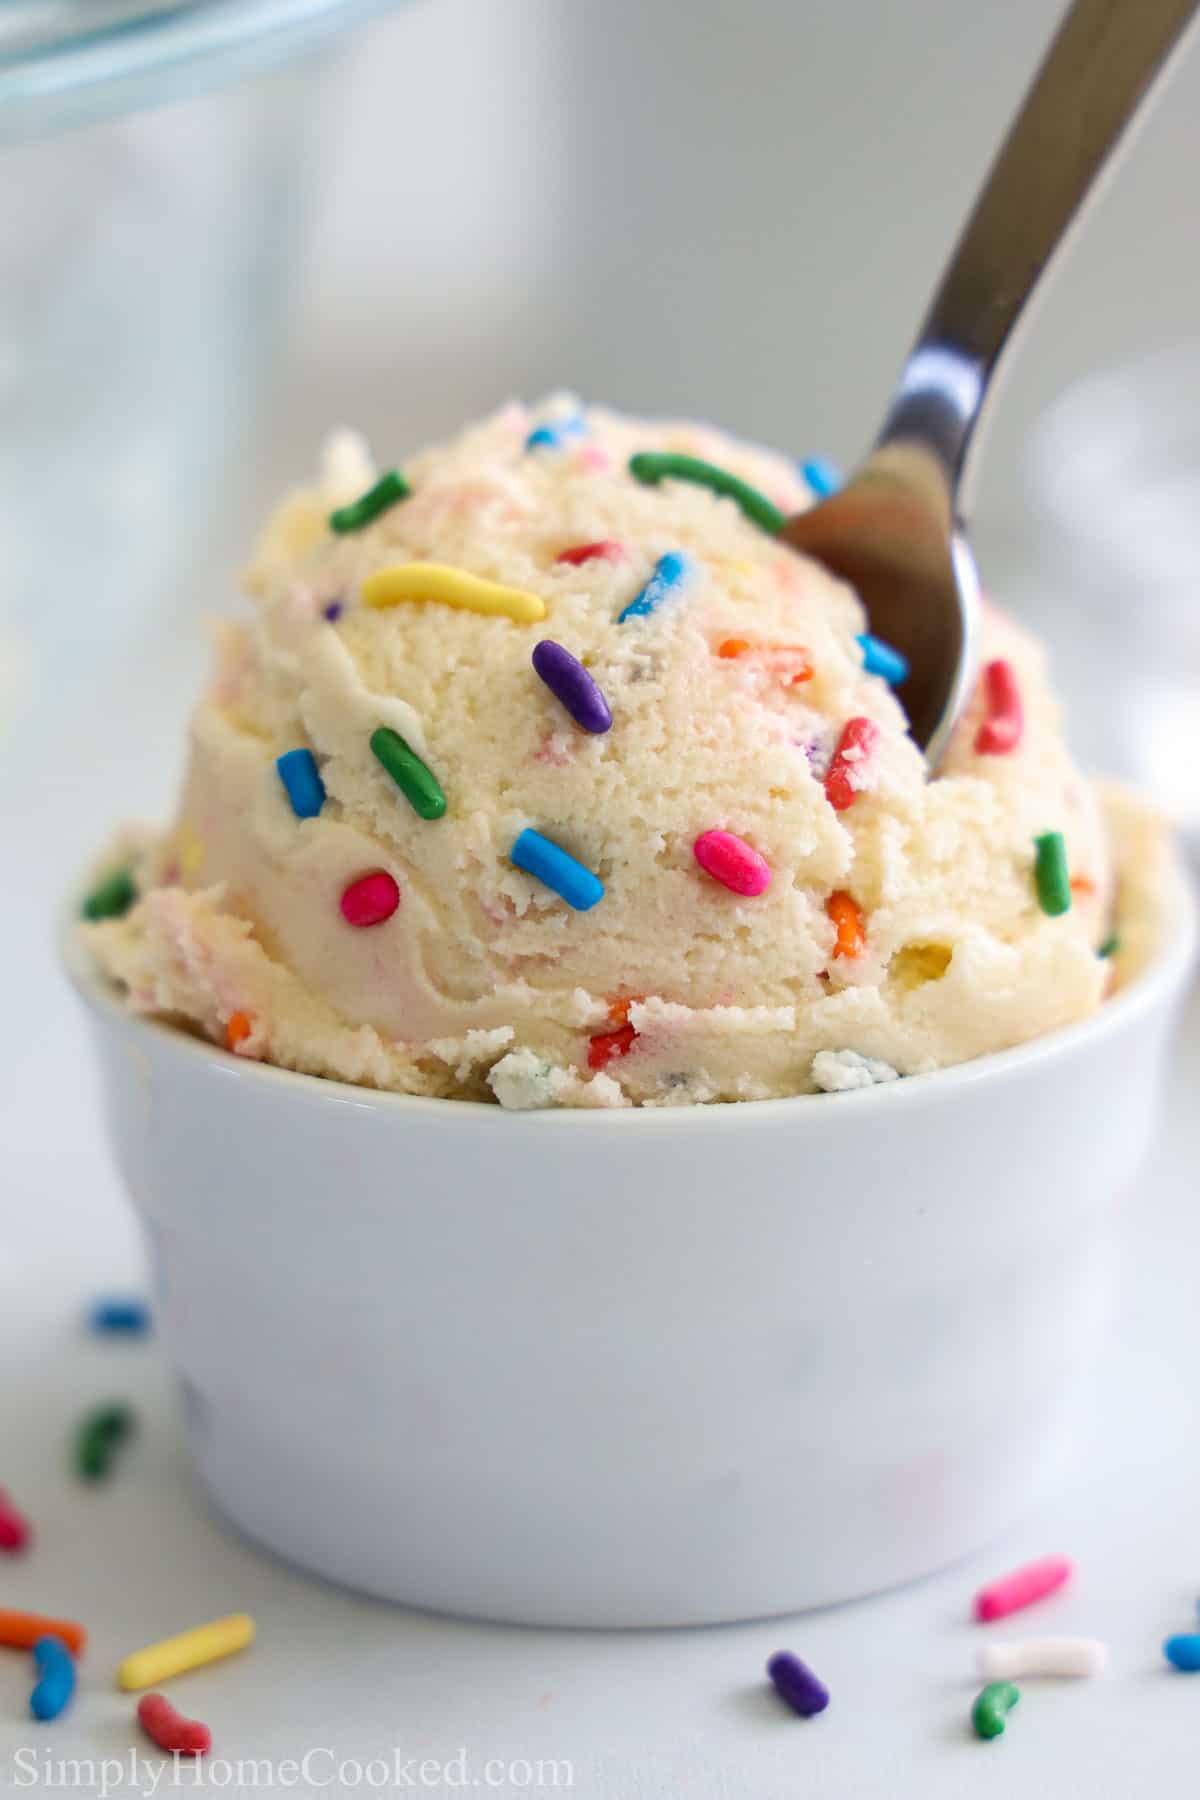 Vertical image of Edible Sugar Cookie Dough with rainbow sprinkles in a white cup